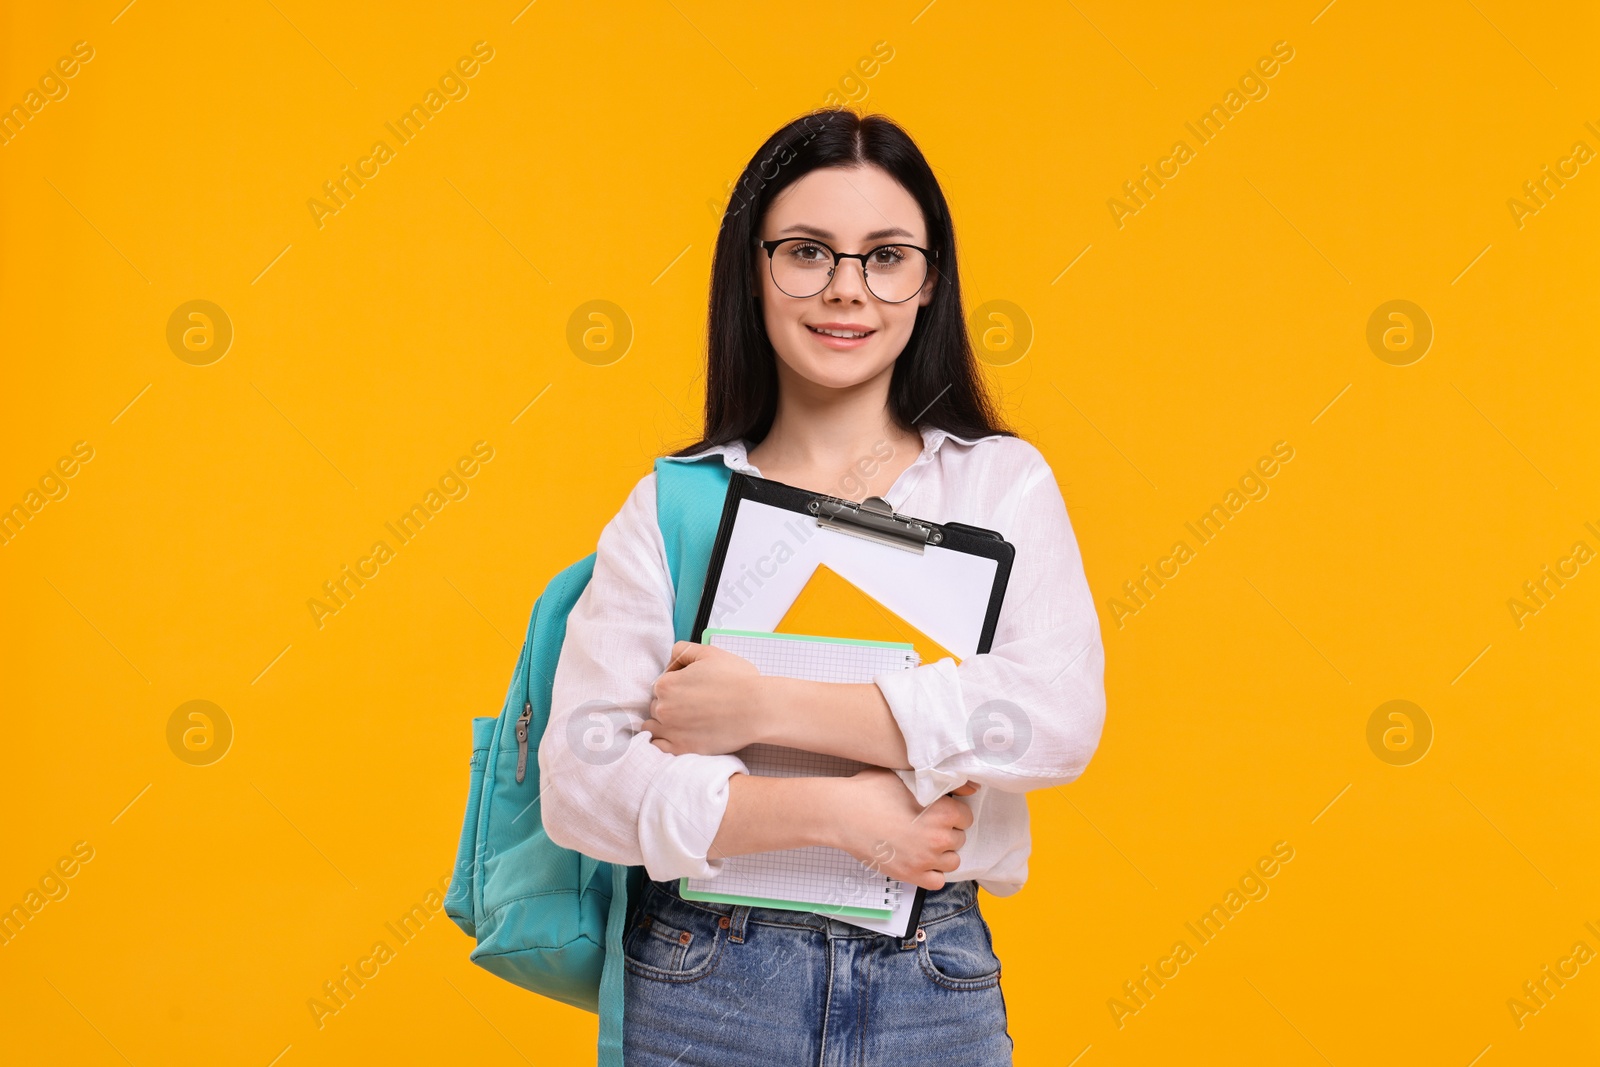 Photo of Smiling student with notebooks and clipboard on yellow background